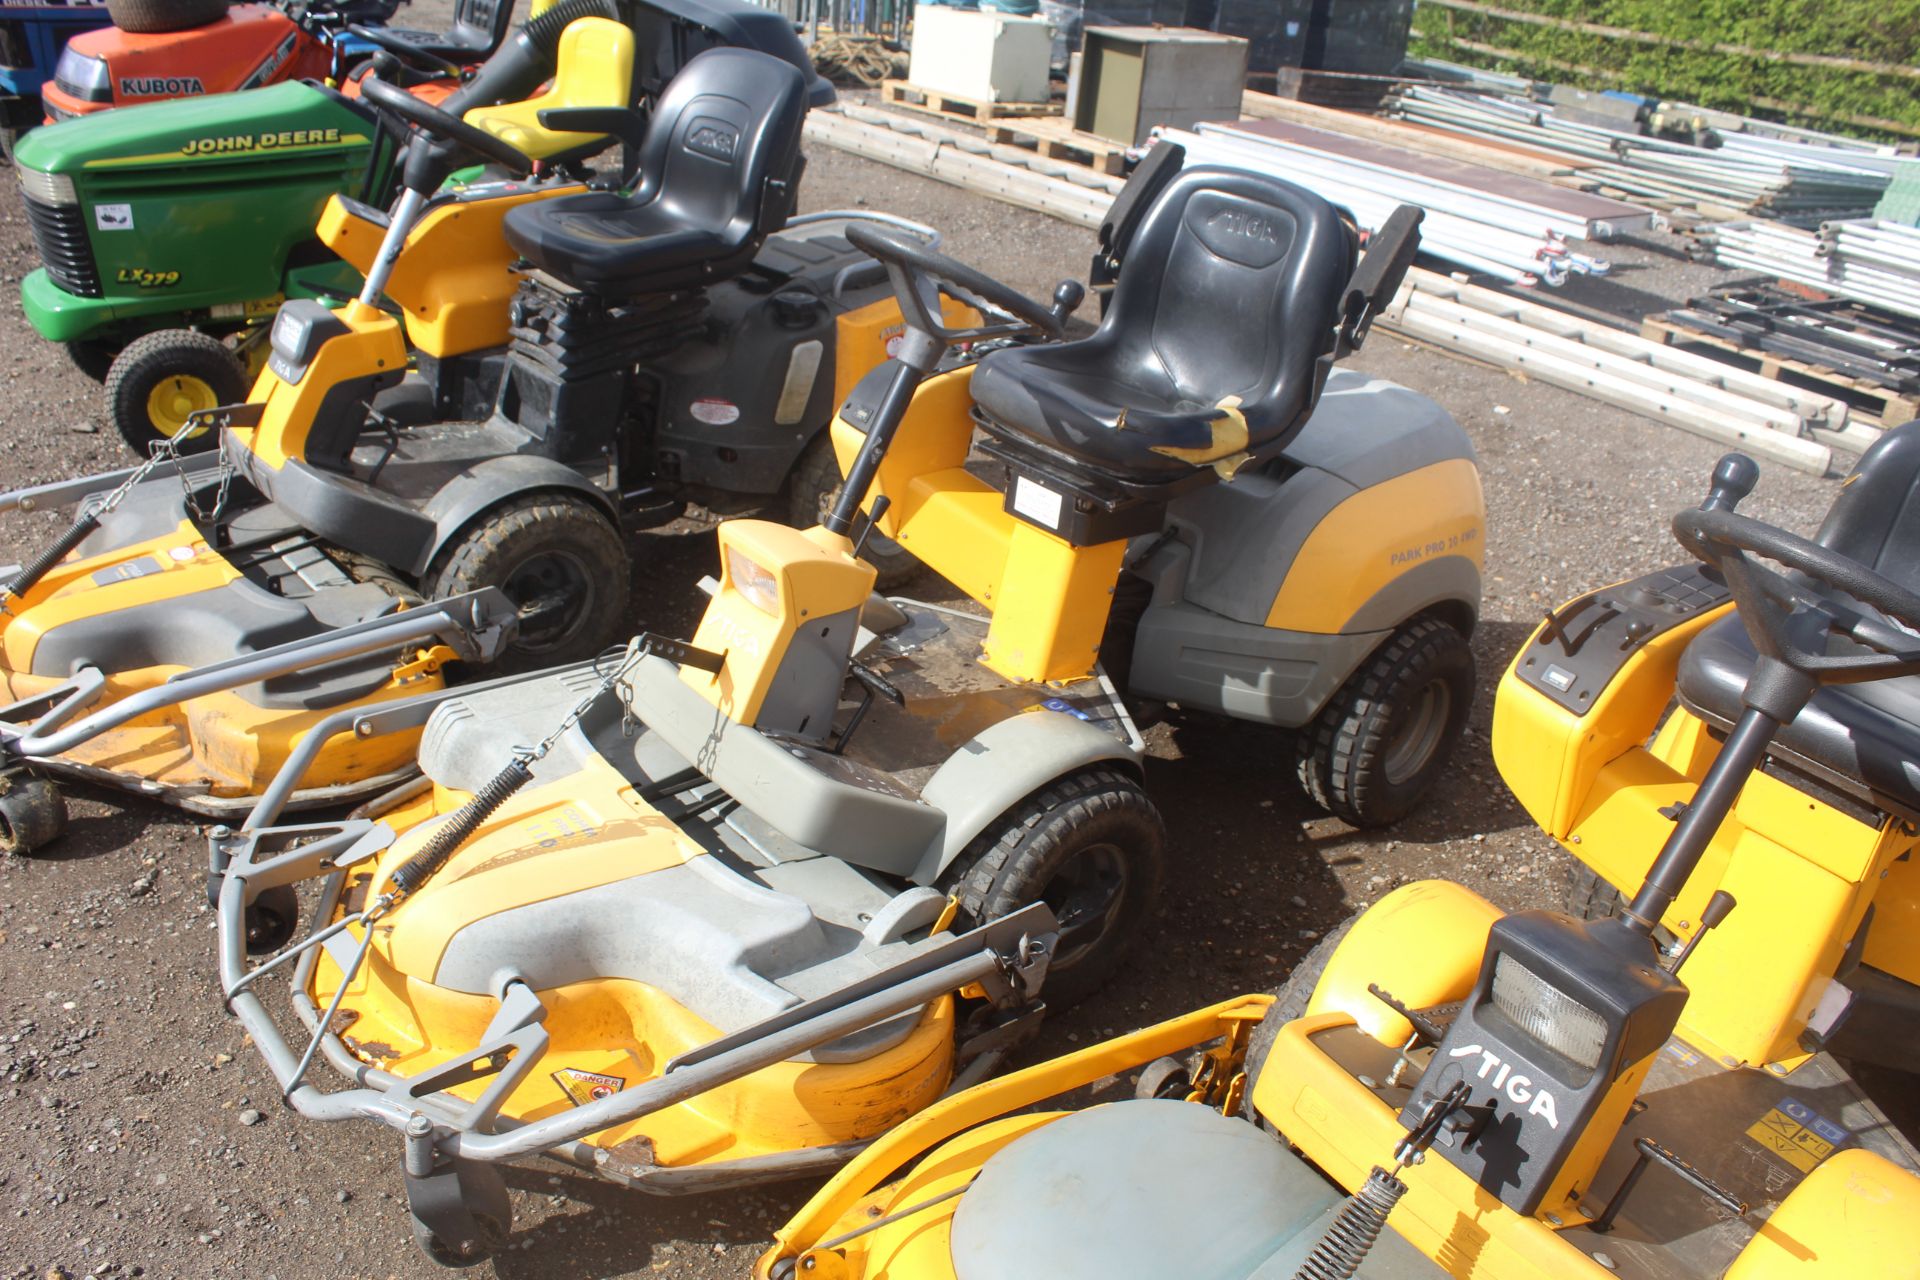 Stiga Park Pro 20 4WD out-front ride-on mower. 550 hours. With Briggs & Stratton 20HP petrol